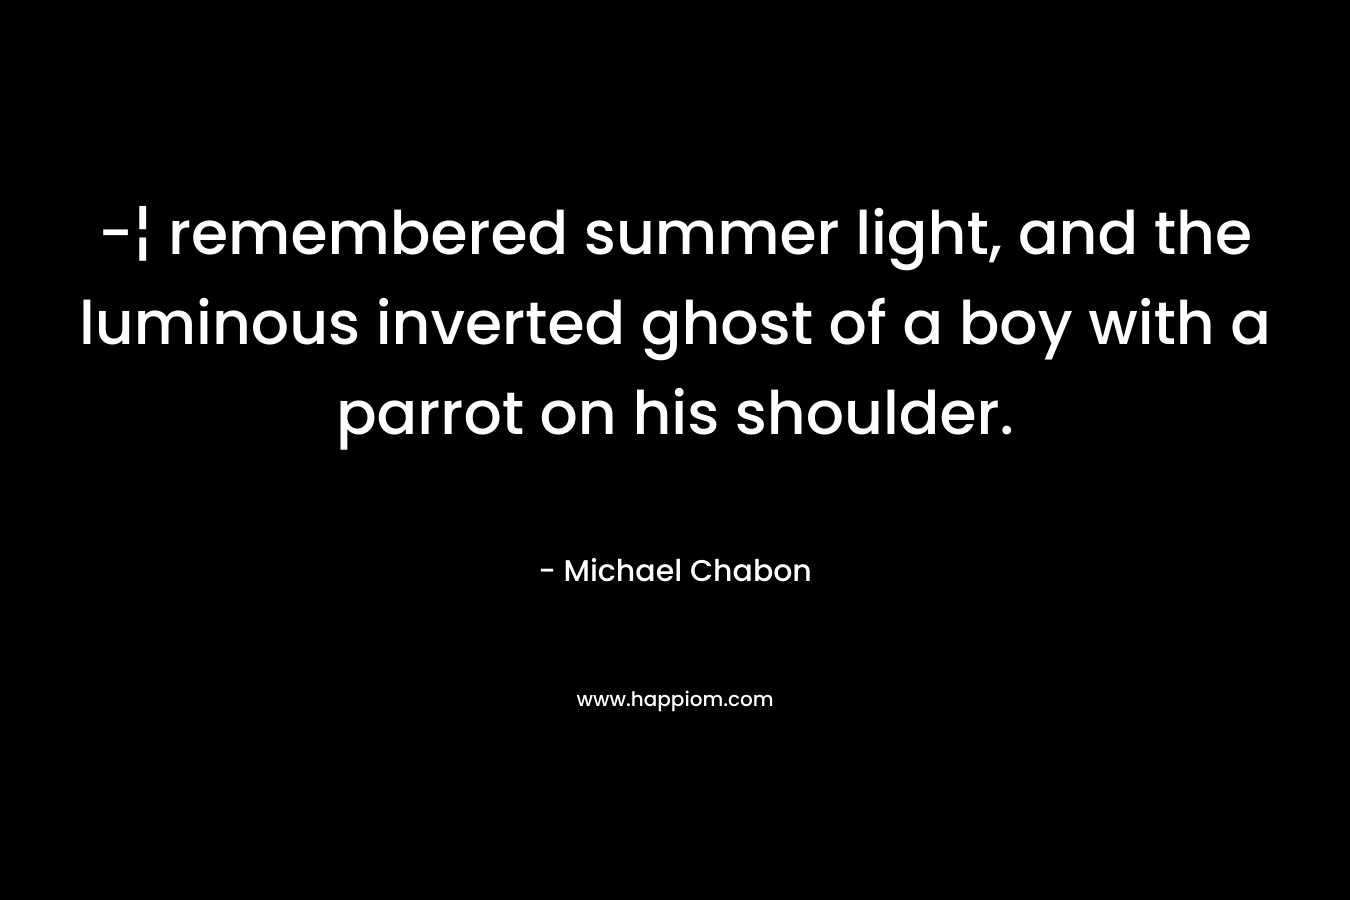 -¦ remembered summer light, and the luminous inverted ghost of a boy with a parrot on his shoulder.